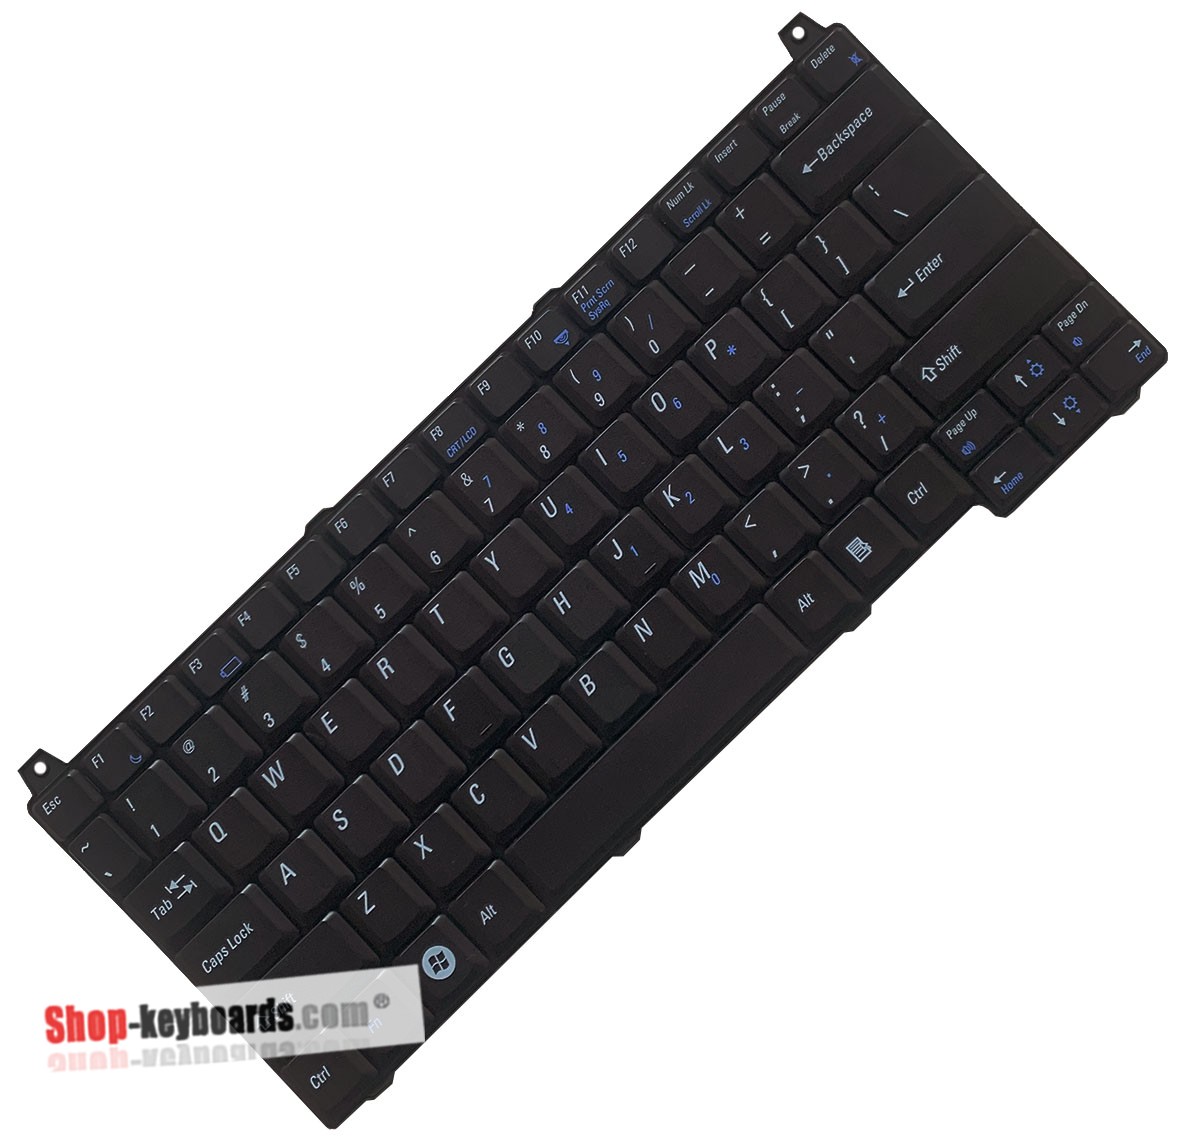 Dell Vostro 1320 Keyboard replacement